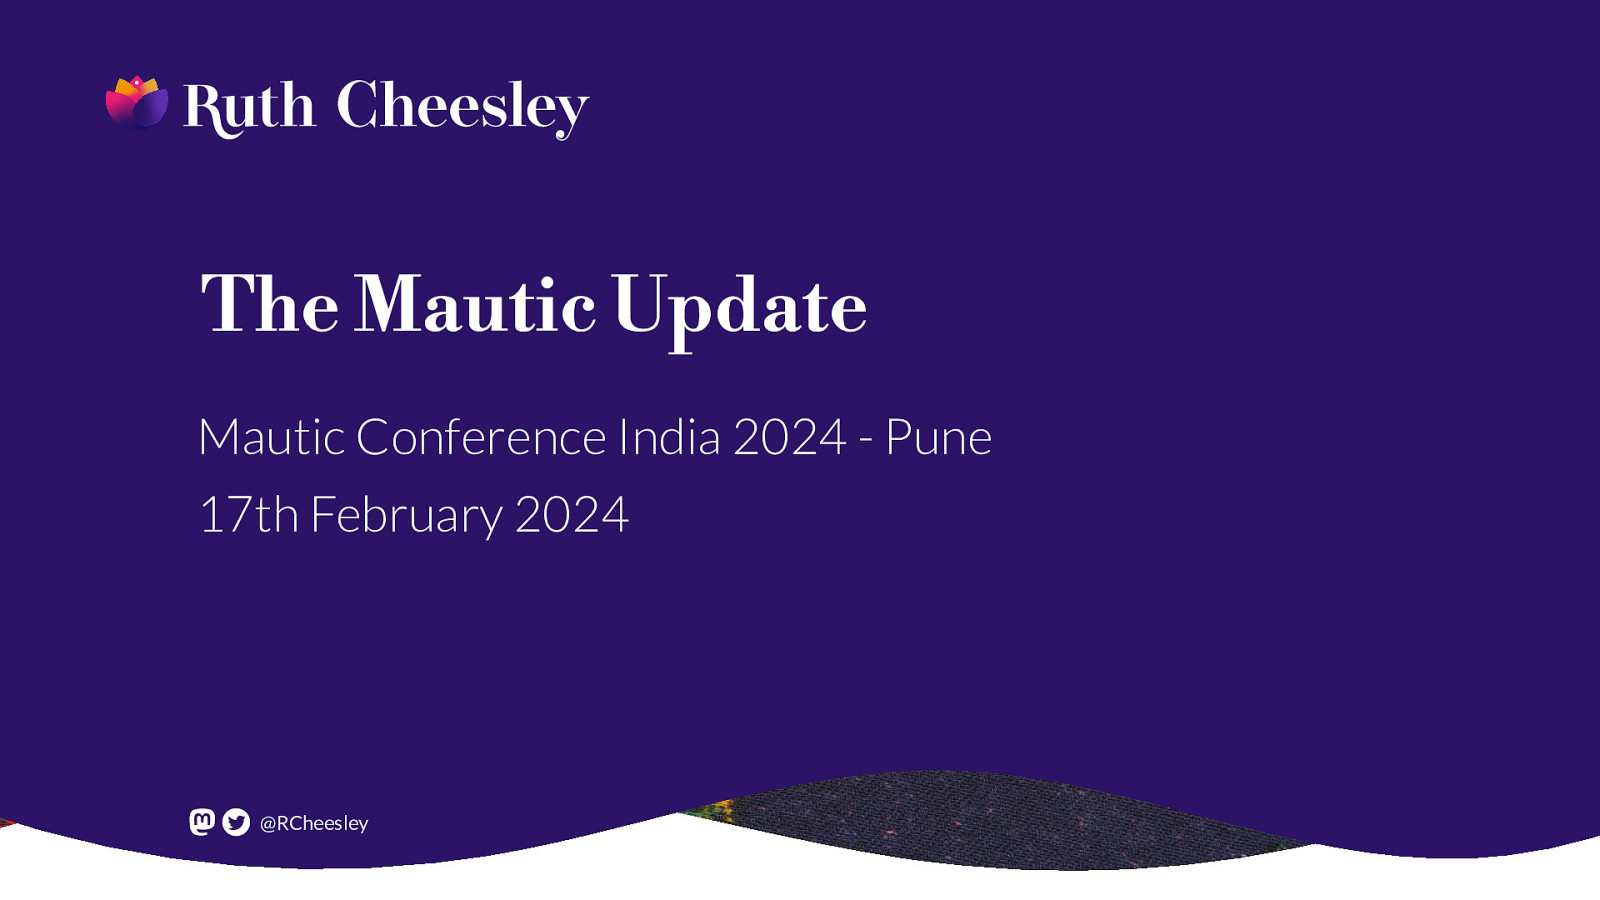 The Mautic Update - February 2024 by Ruth Cheesley